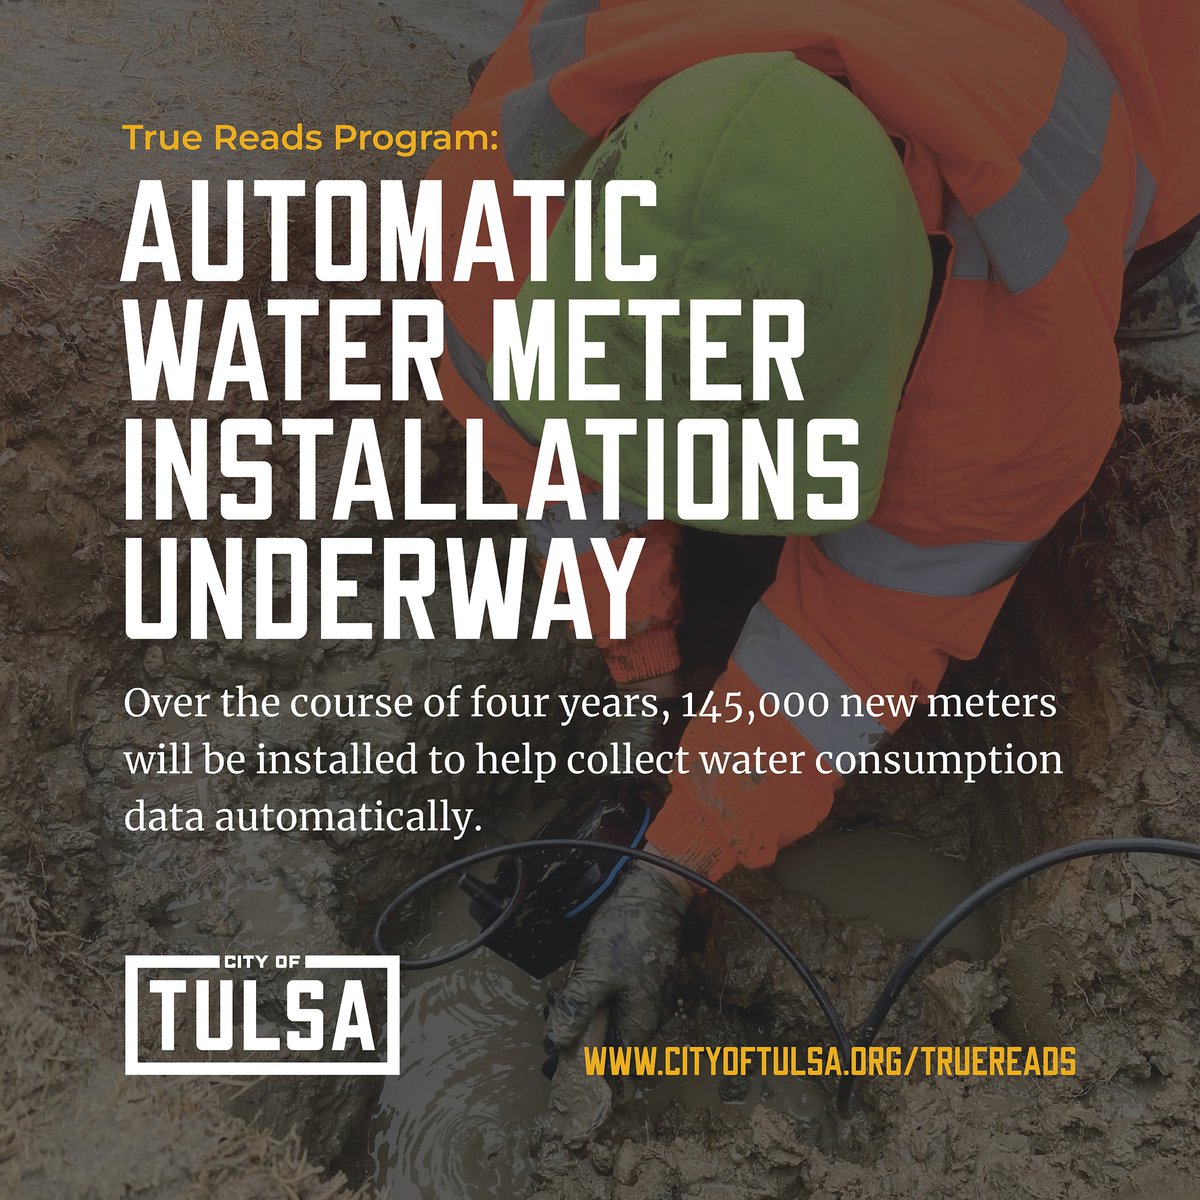 As part of the True Reads Meter Reading Program, crews continue to install new automated meter readers throughout Tulsa. Find FAQs, a dashboard & map, and more info on this program online at cityoftulsa.org/truereads Questions? Email: Tulsa311@cityoftulsa.org or call: 311.